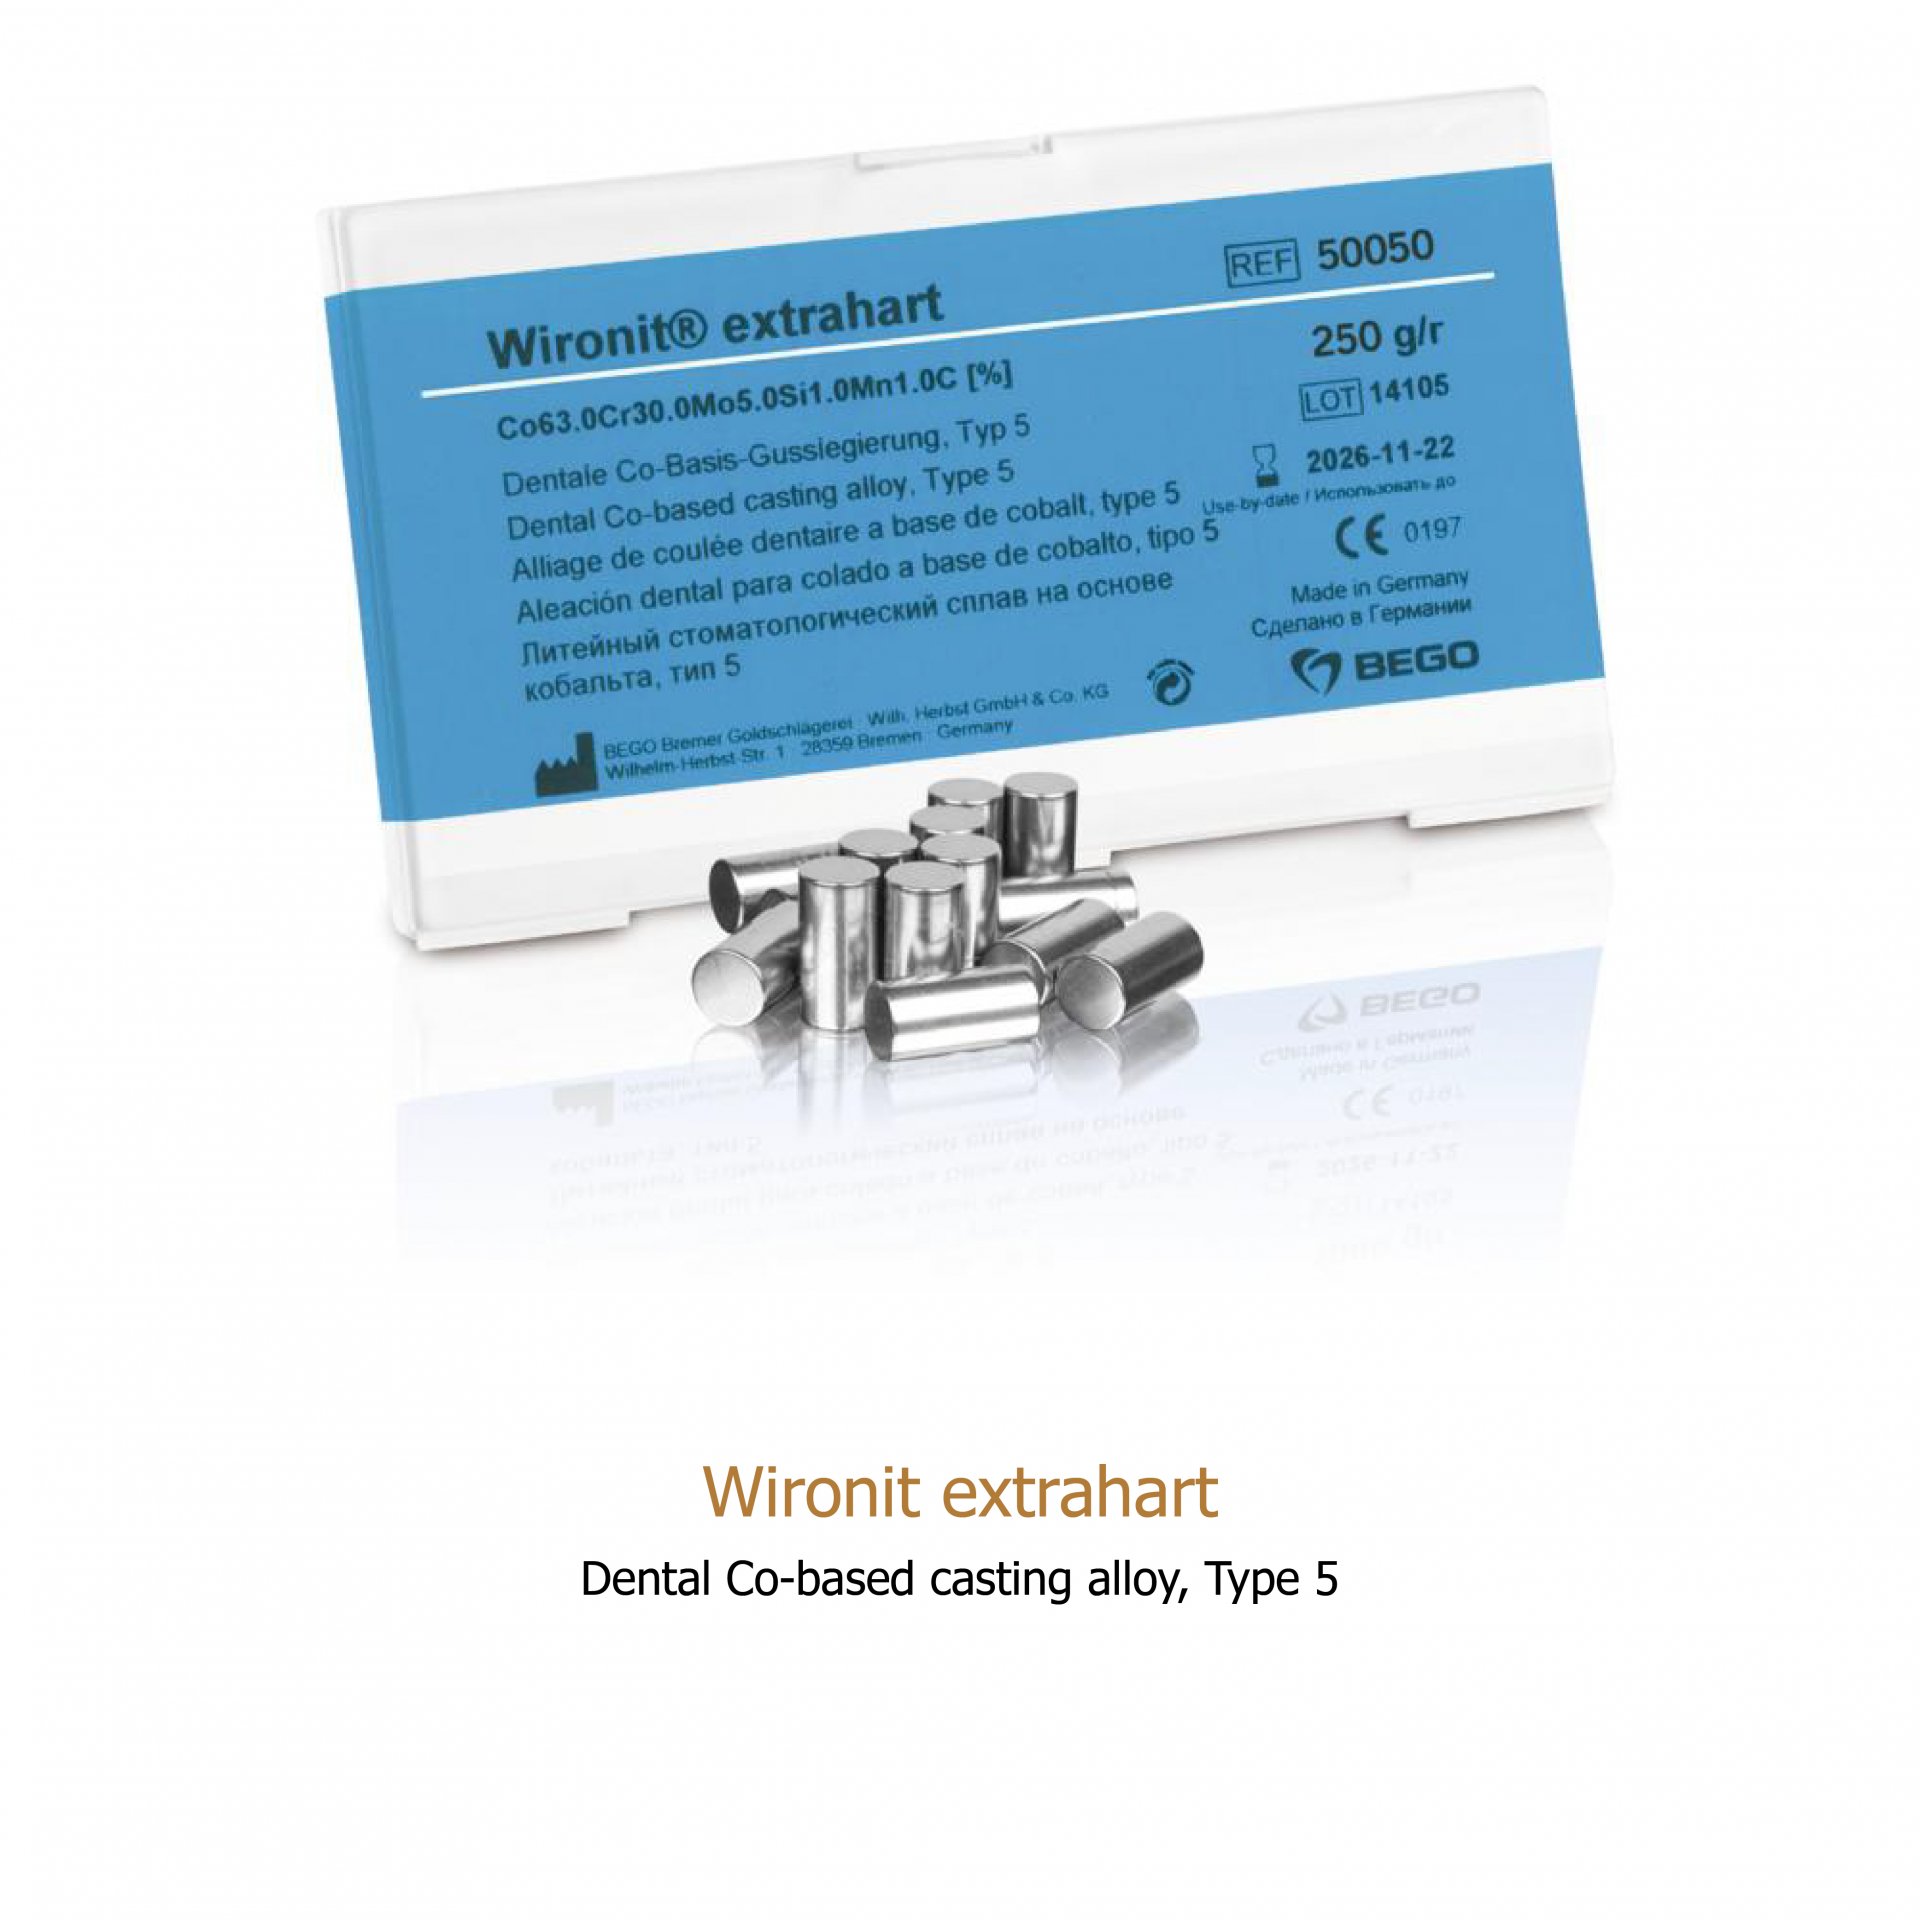 Wironit Extrahart